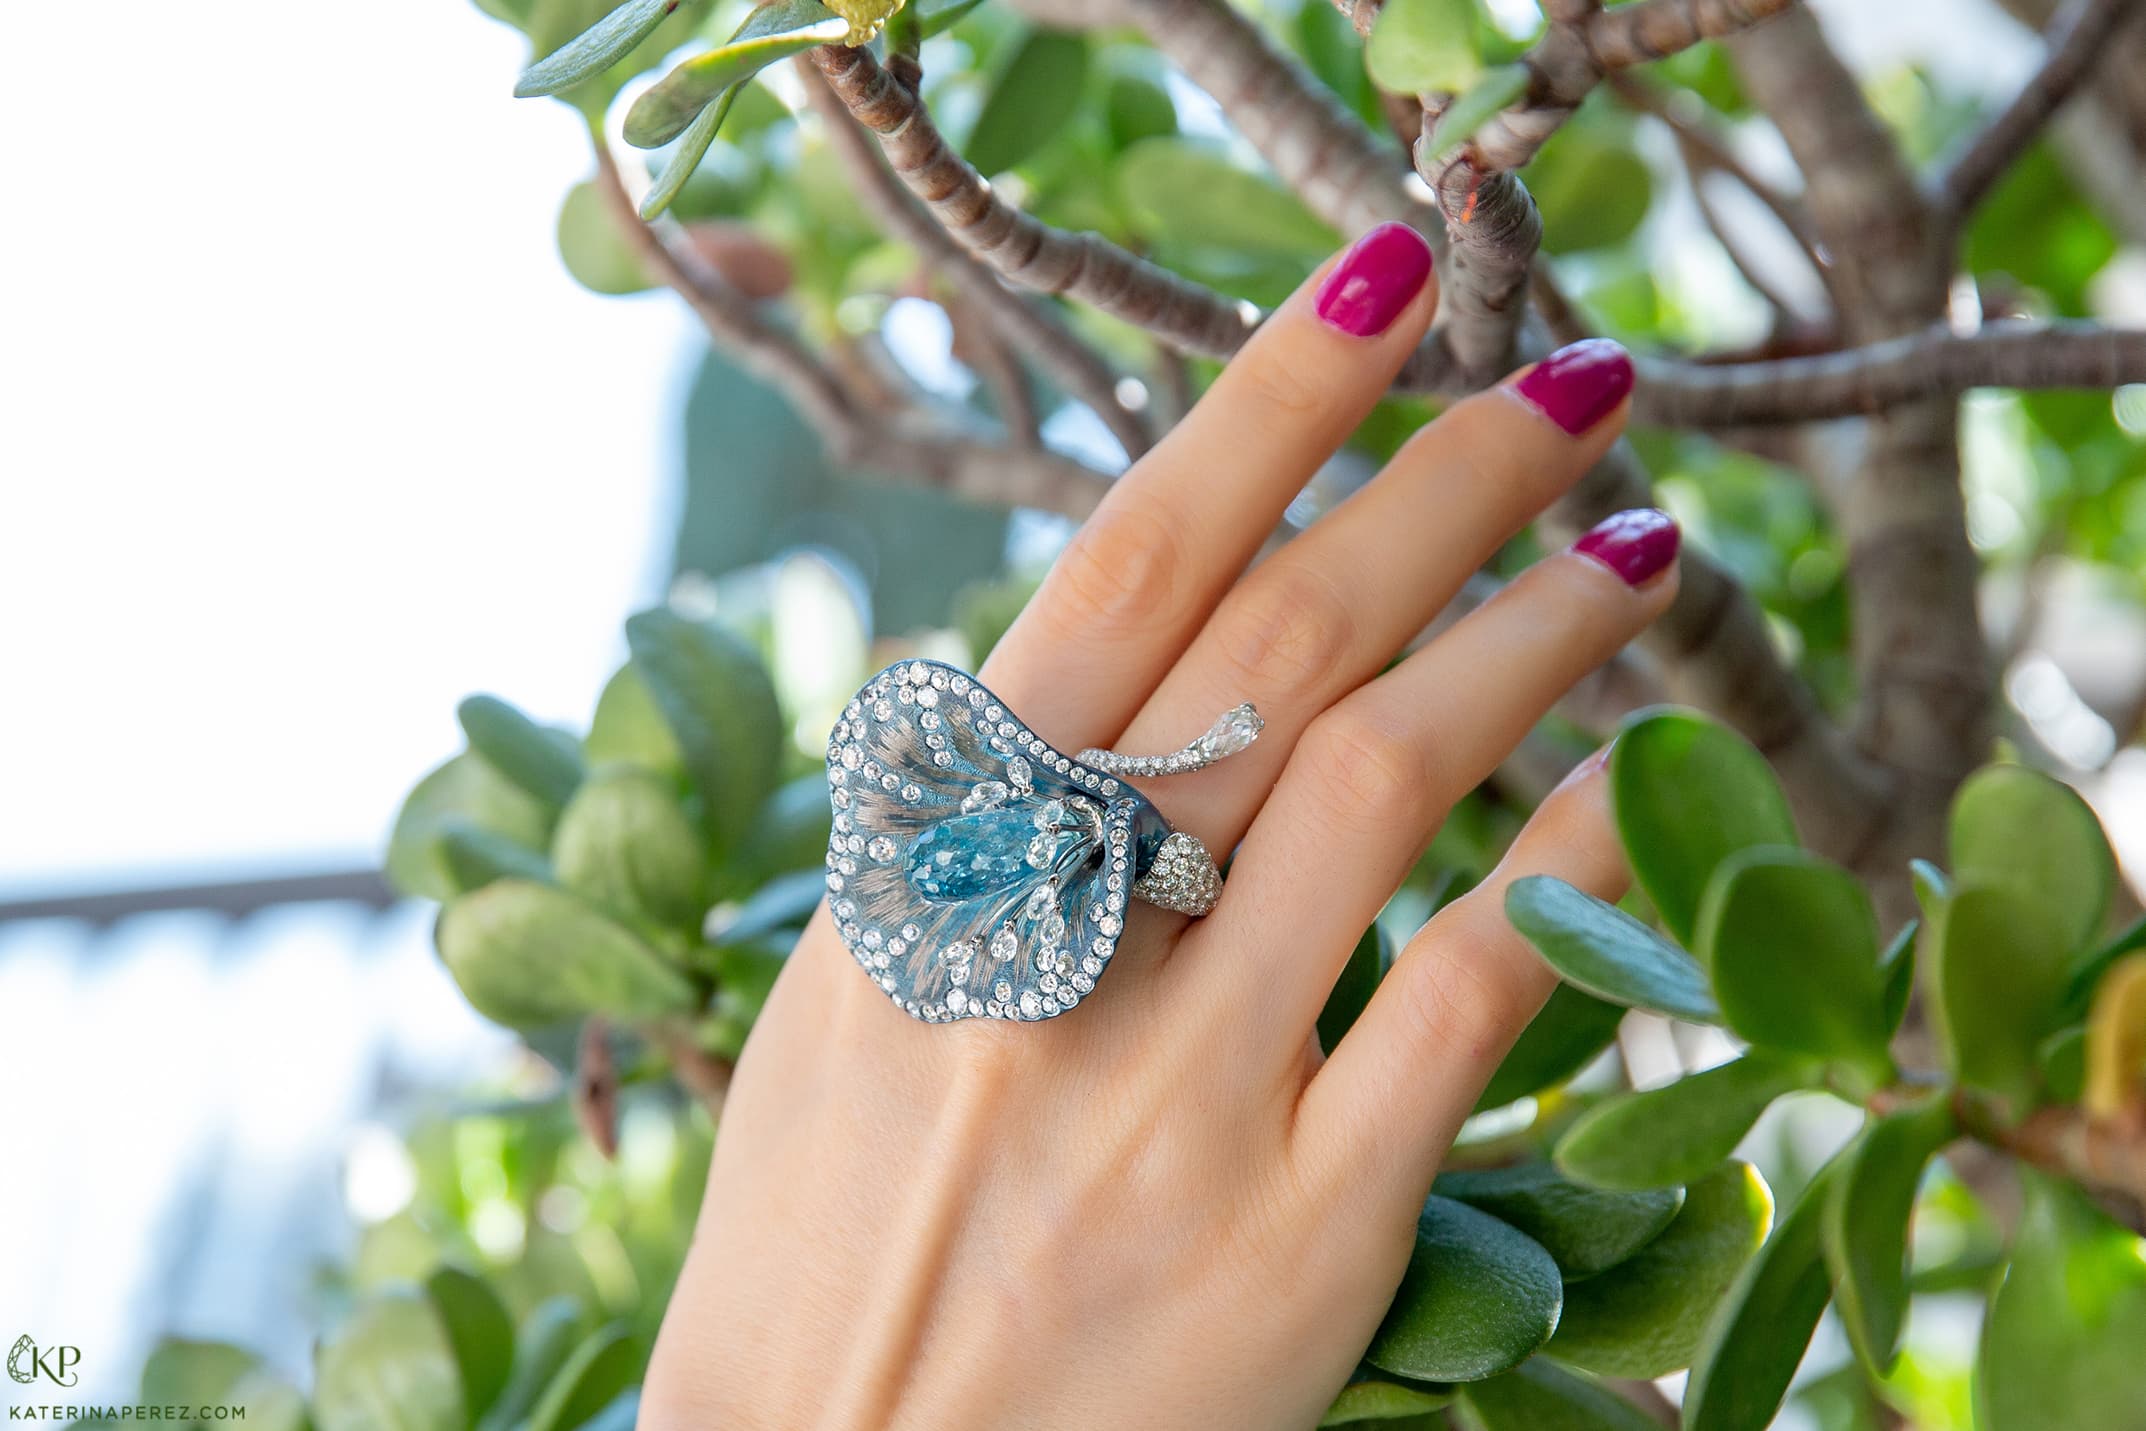 Contemporary Italian titanium flower ring set with a 16 carat aquamarine and 7 carats of diamonds, available at Galerie Montaigne